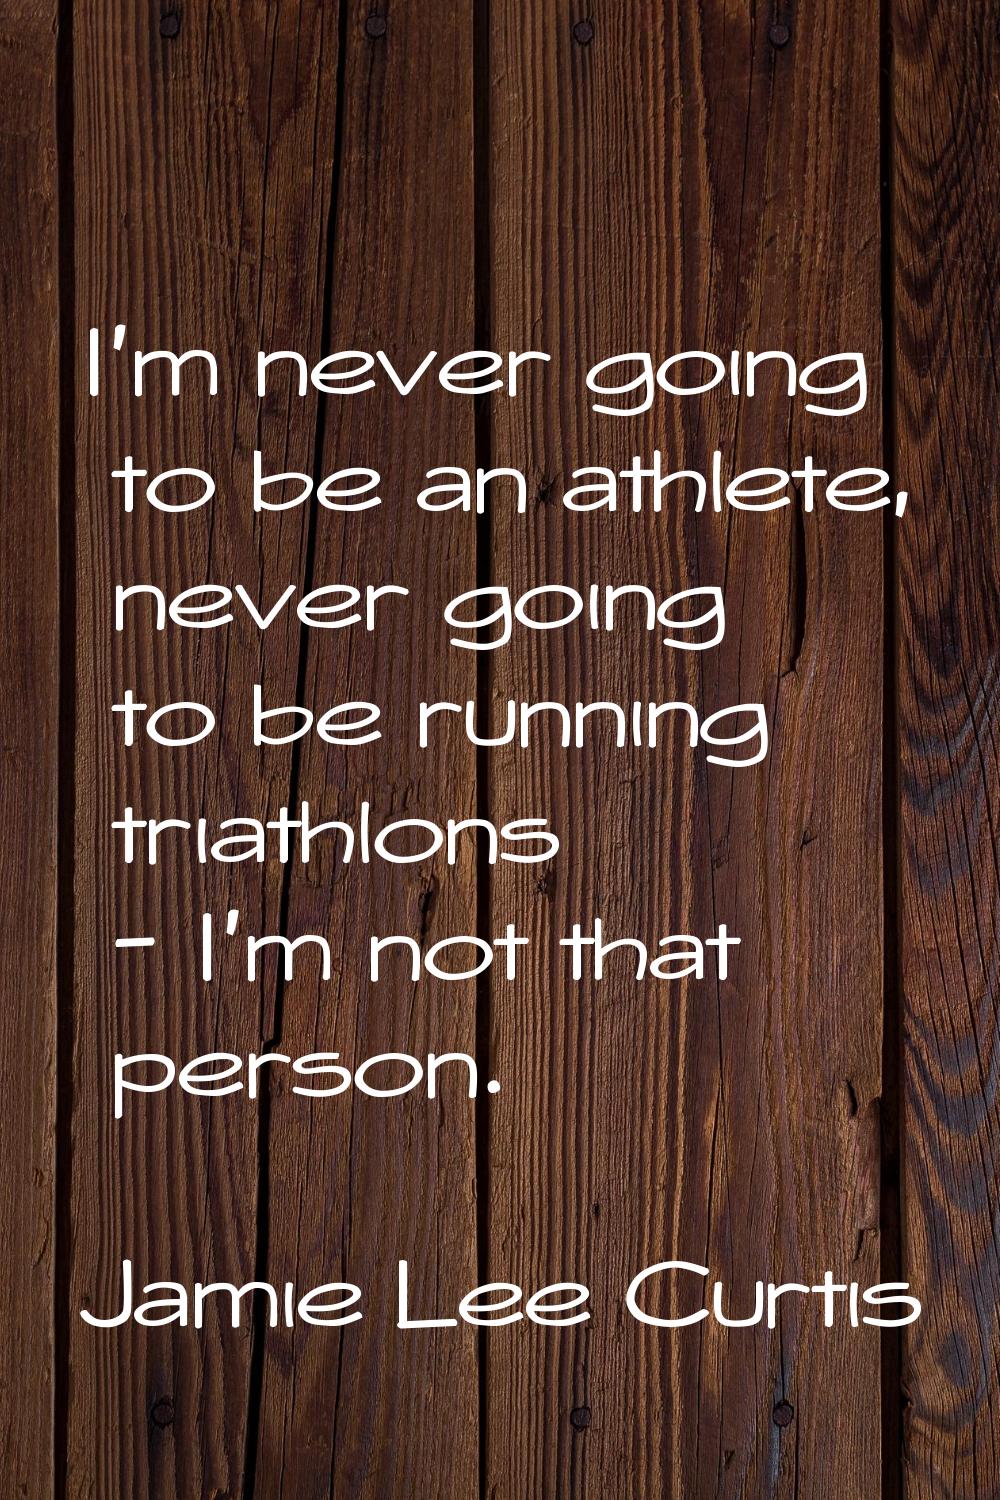 I'm never going to be an athlete, never going to be running triathlons - I'm not that person.